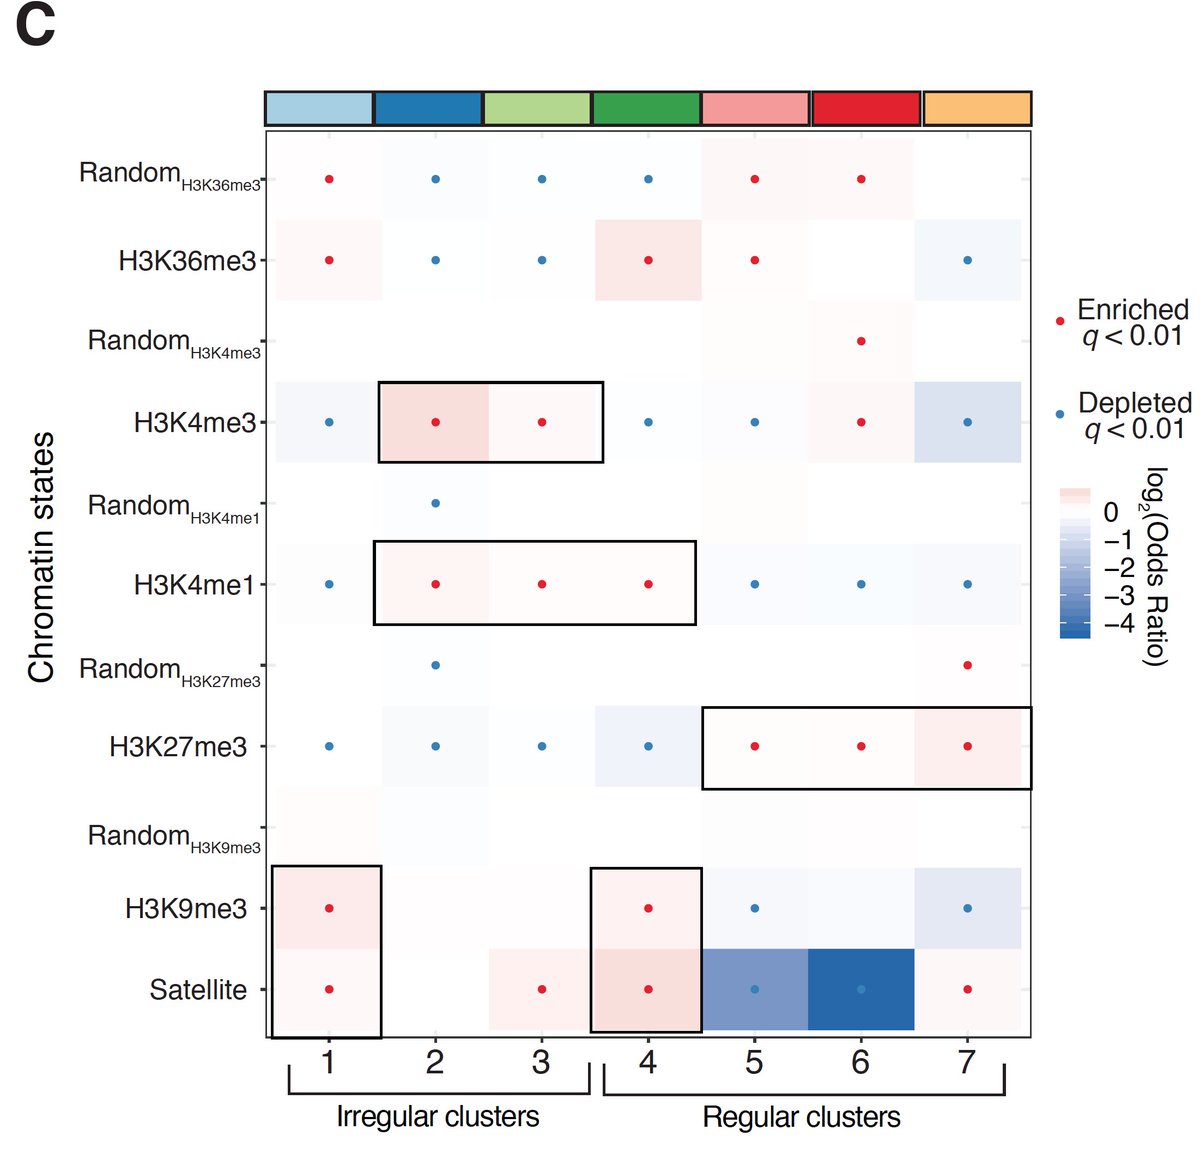 A major takeaway from all of our analyses is that chromatin is *very* heterogeneous in terms of pattern usage. Still, we do find that specific chromatin types (e.g. const. heterochromatin, H3K36me3 domains) are punctuated by specific classes of oligonucleosome pattern.